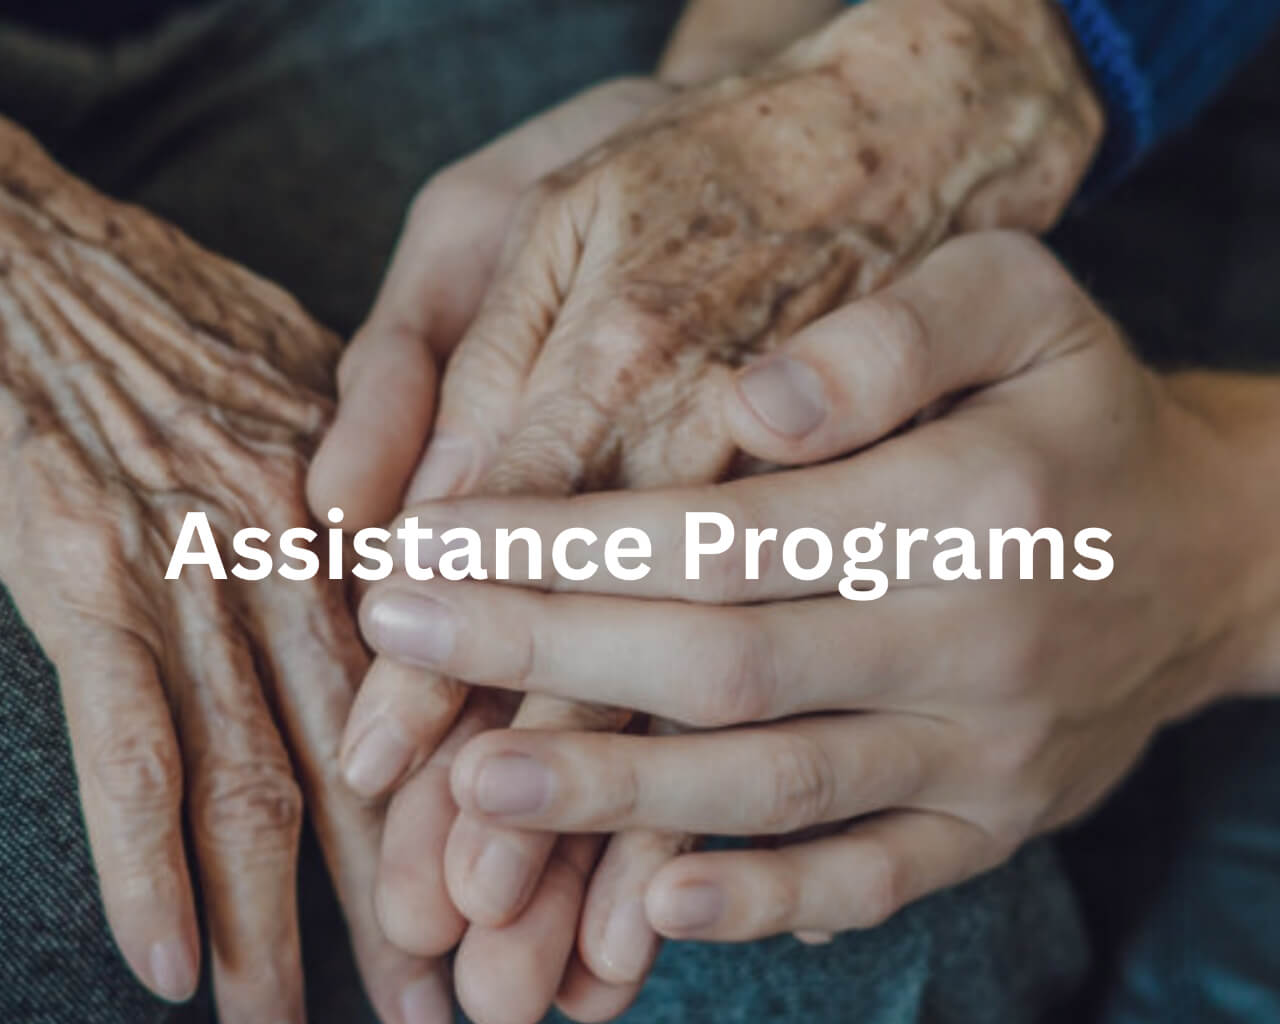 Assistance programs poster with peoples hand on each other